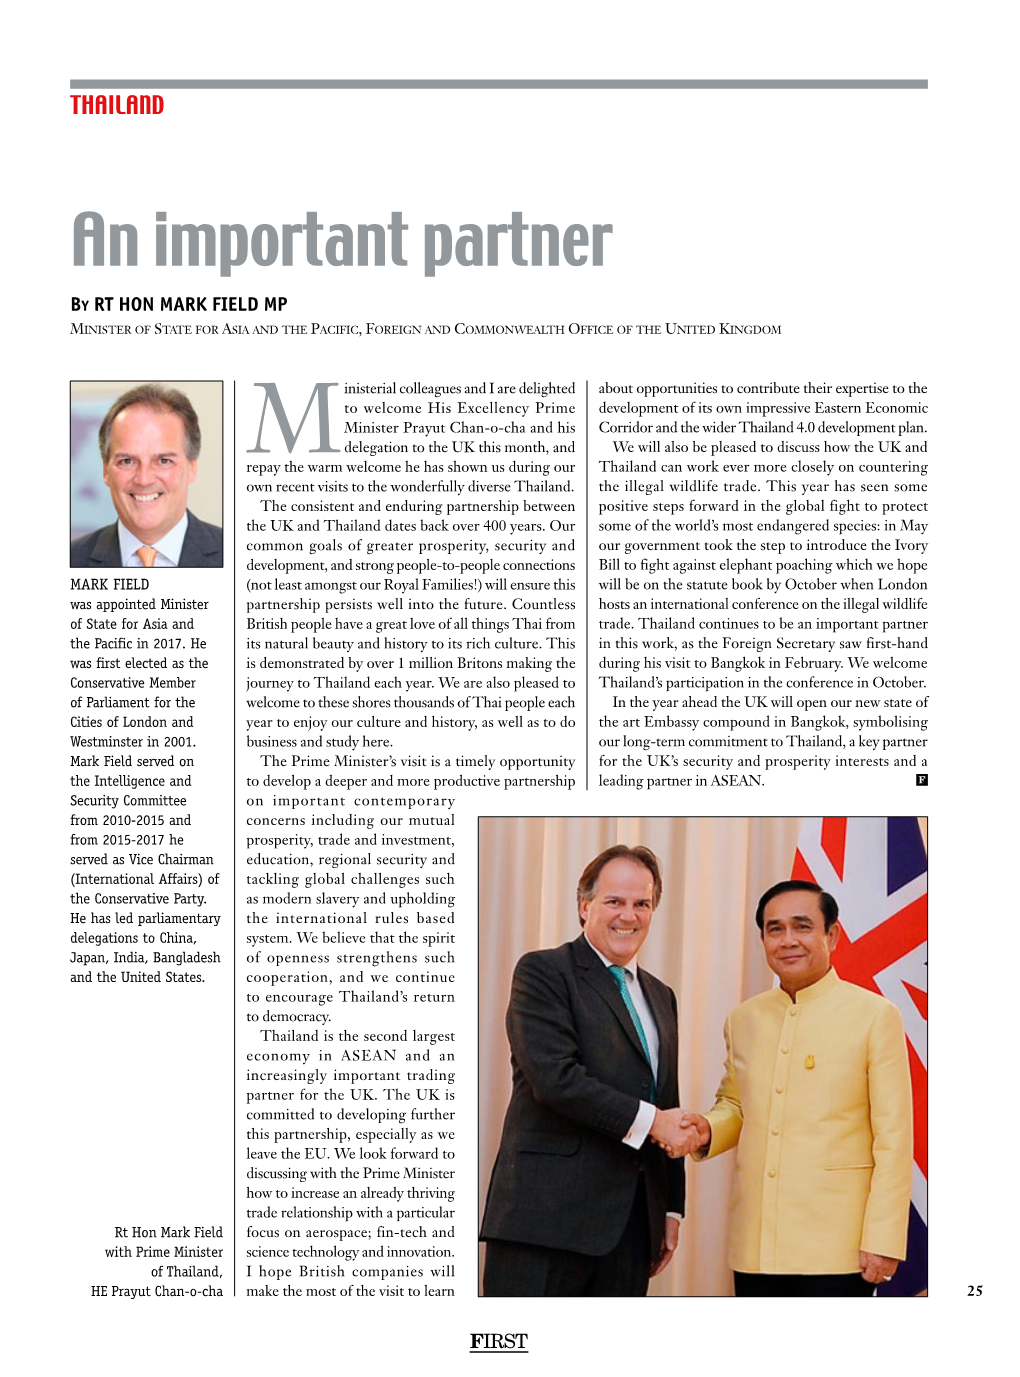 An Important Partner by RT HON MARK FIELD MP Minister of State for Asia and the Pacific, Foreign and Commonwealth Office of the United Kingdom